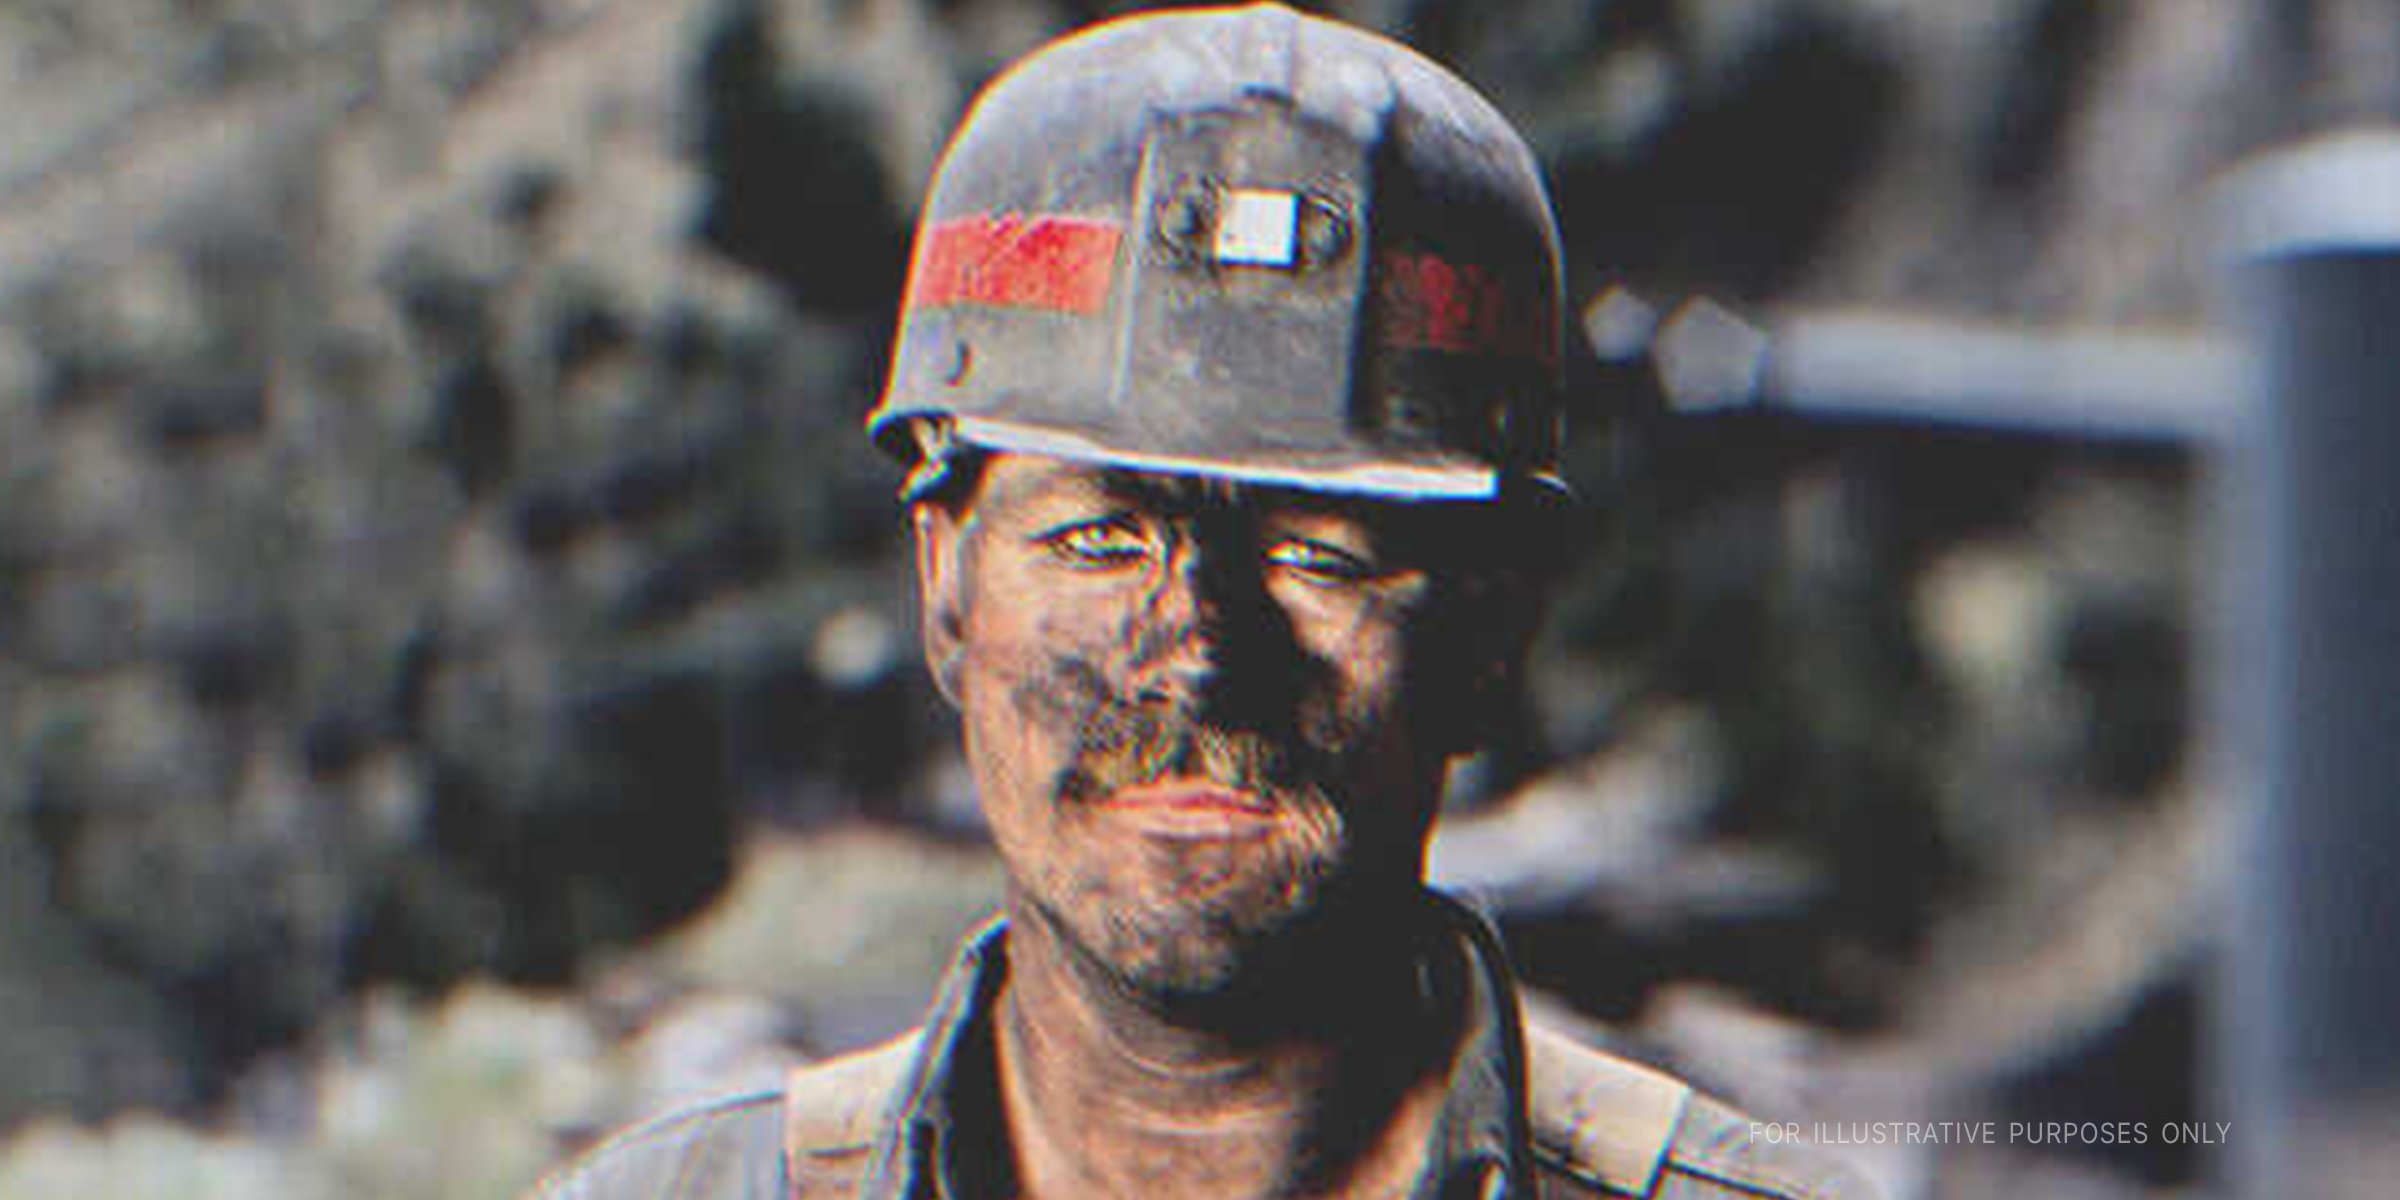 Coal miner at work | Source: Getty Images